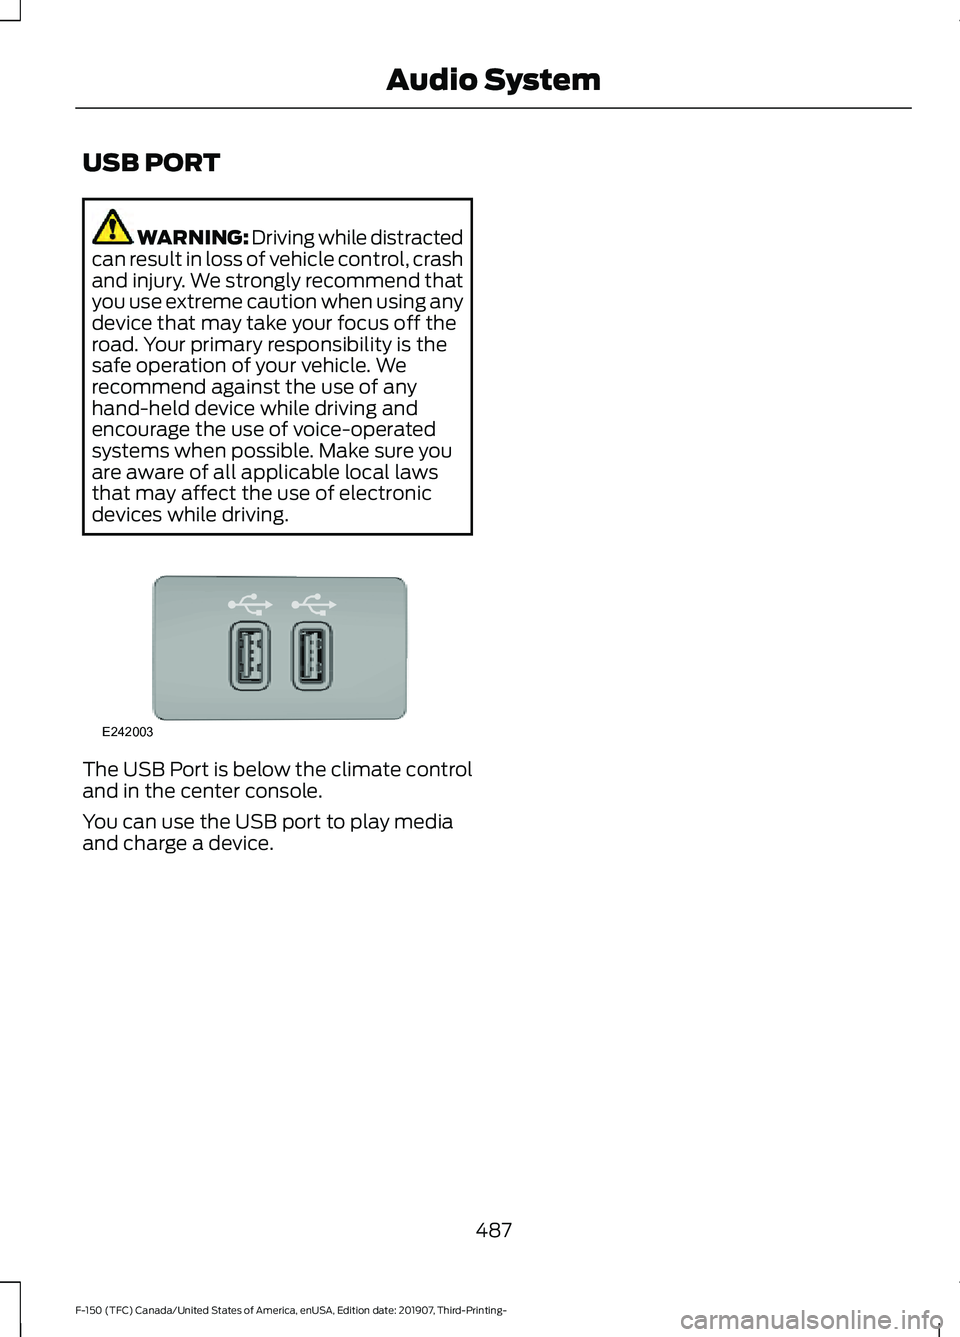 FORD F-150 2020 Owners Manual USB PORT
WARNING: Driving while distracted
can result in loss of vehicle control, crash
and injury. We strongly recommend that
you use extreme caution when using any
device that may take your focus of